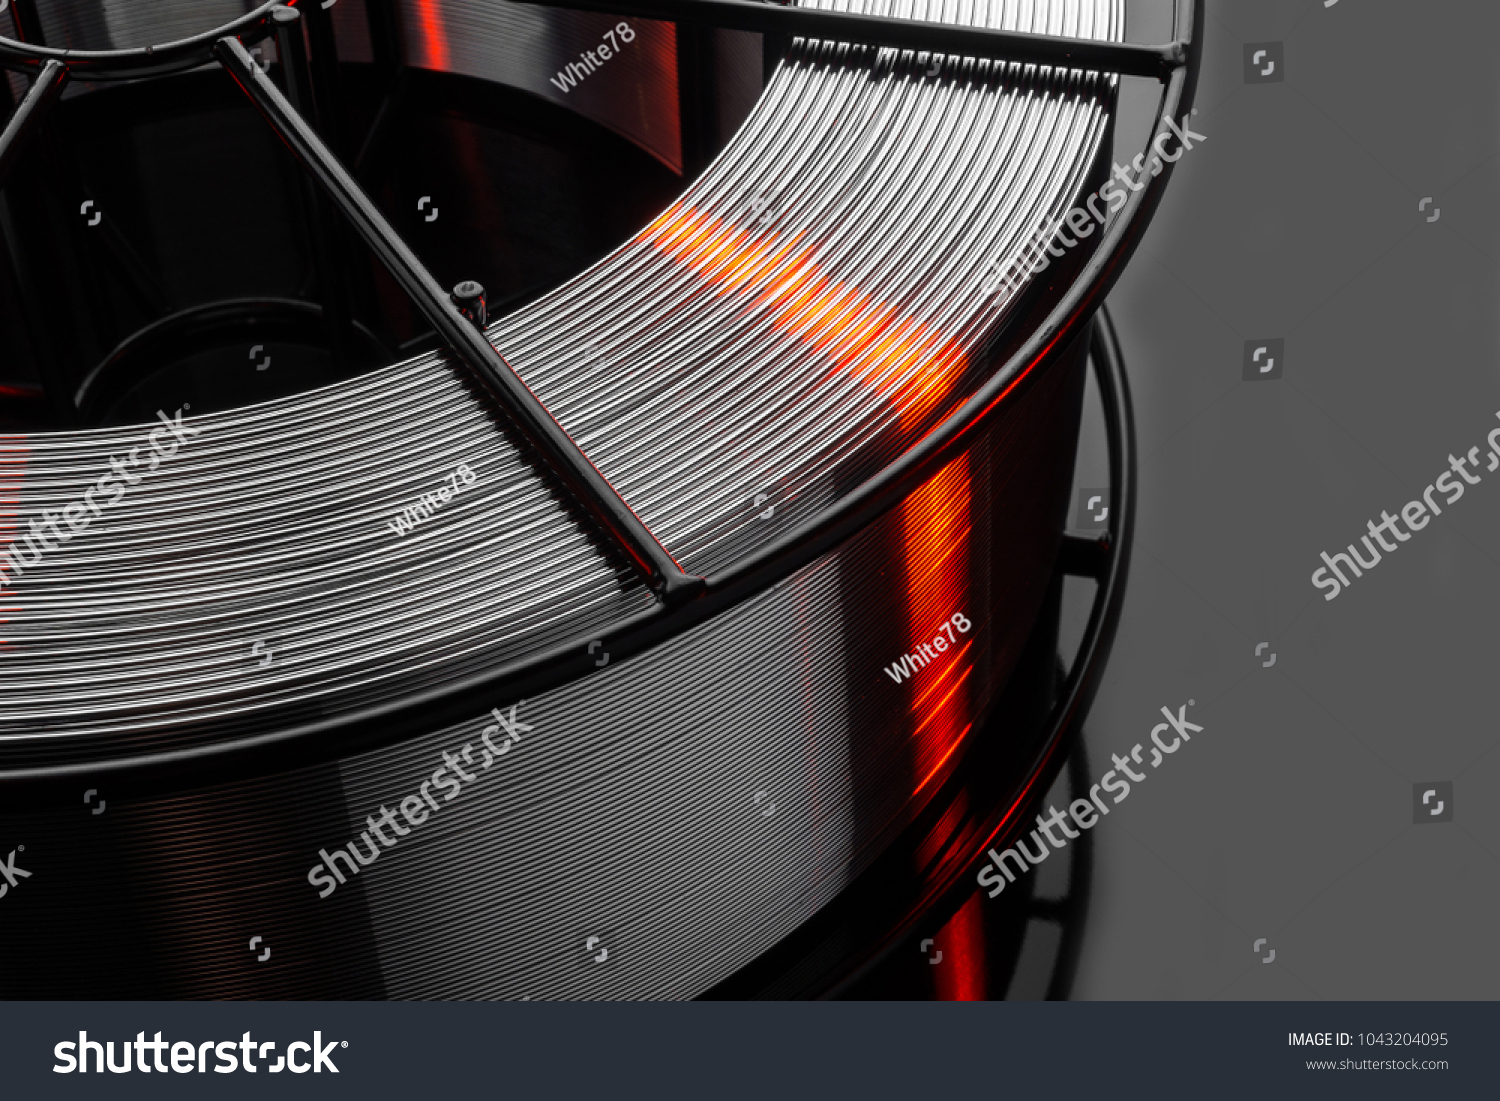 welding wire, stainless steel, on a black background #1043204095